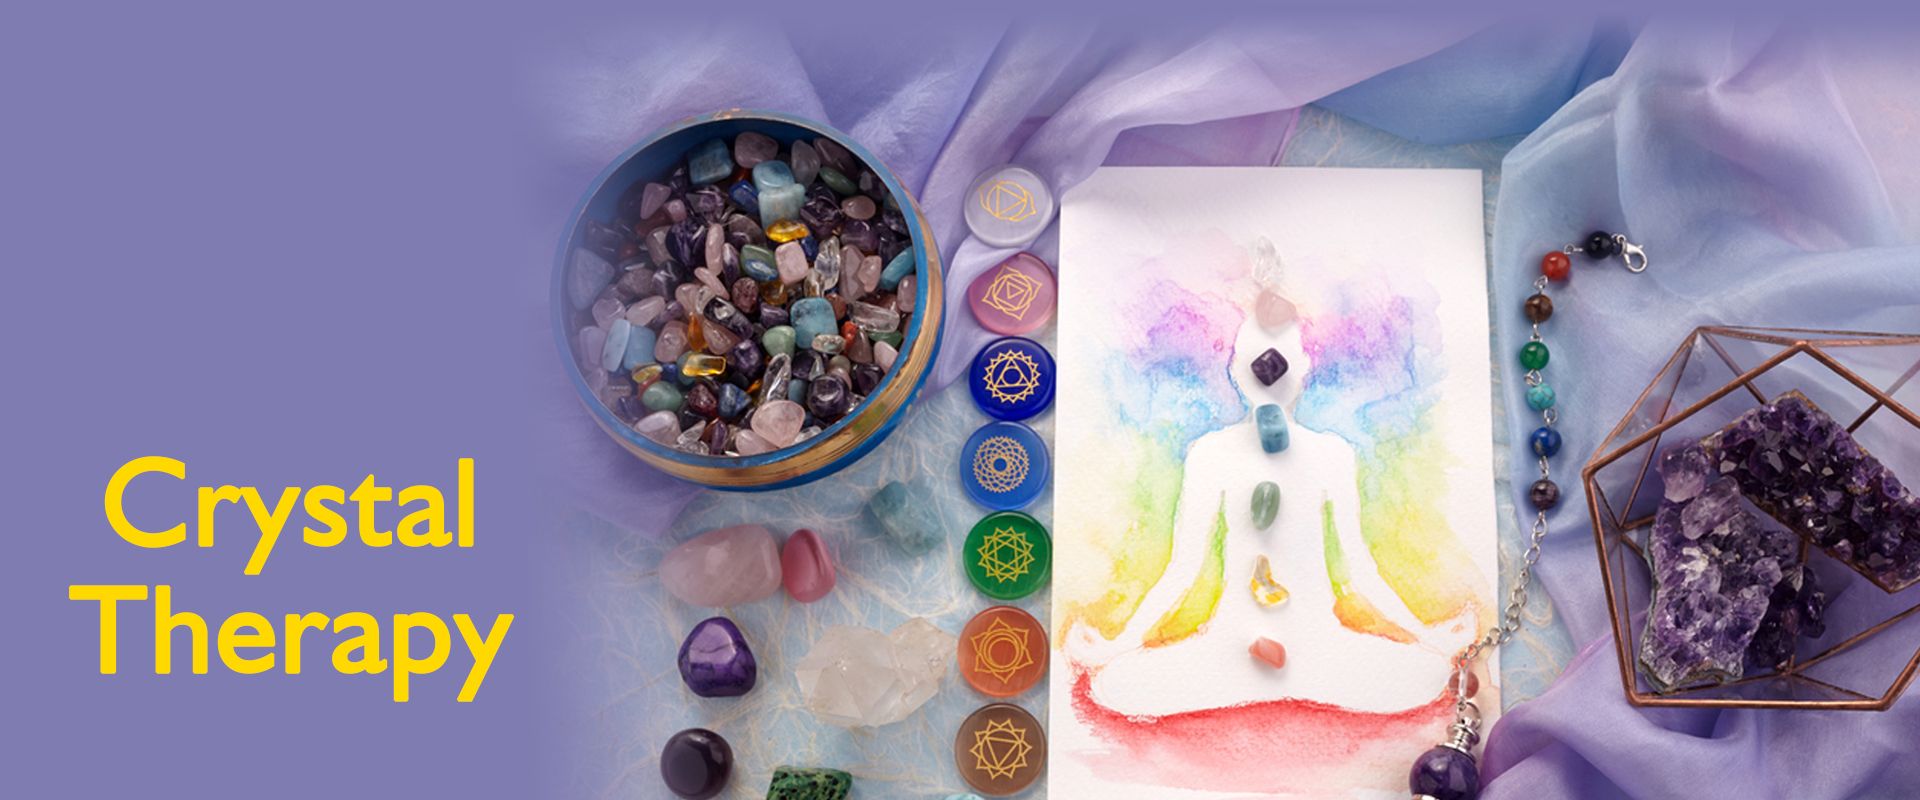 Crystal-Therapy-banner